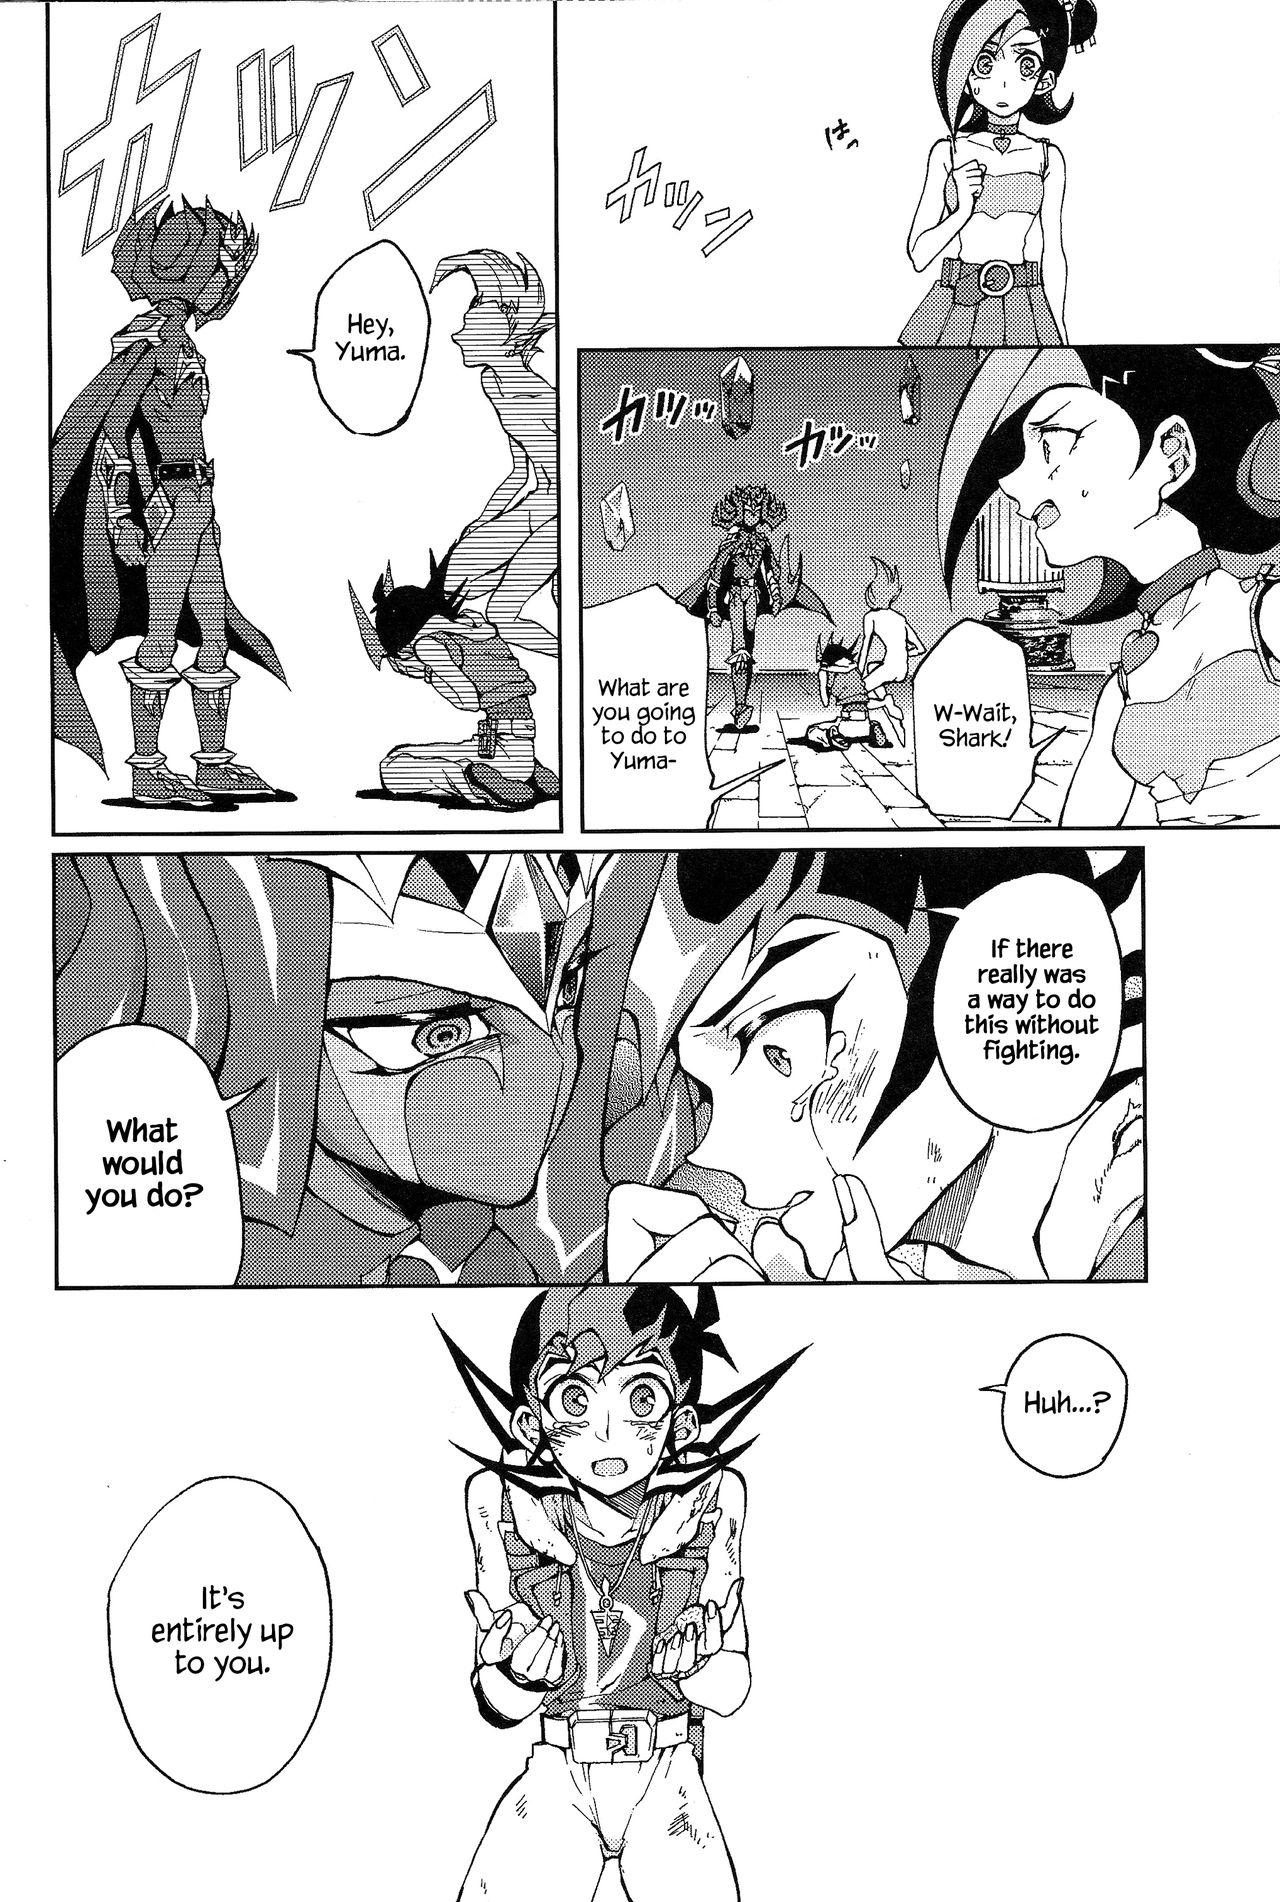 Dick Ultimate Eden - Yu-gi-oh zexal Barely 18 Porn - Page 9